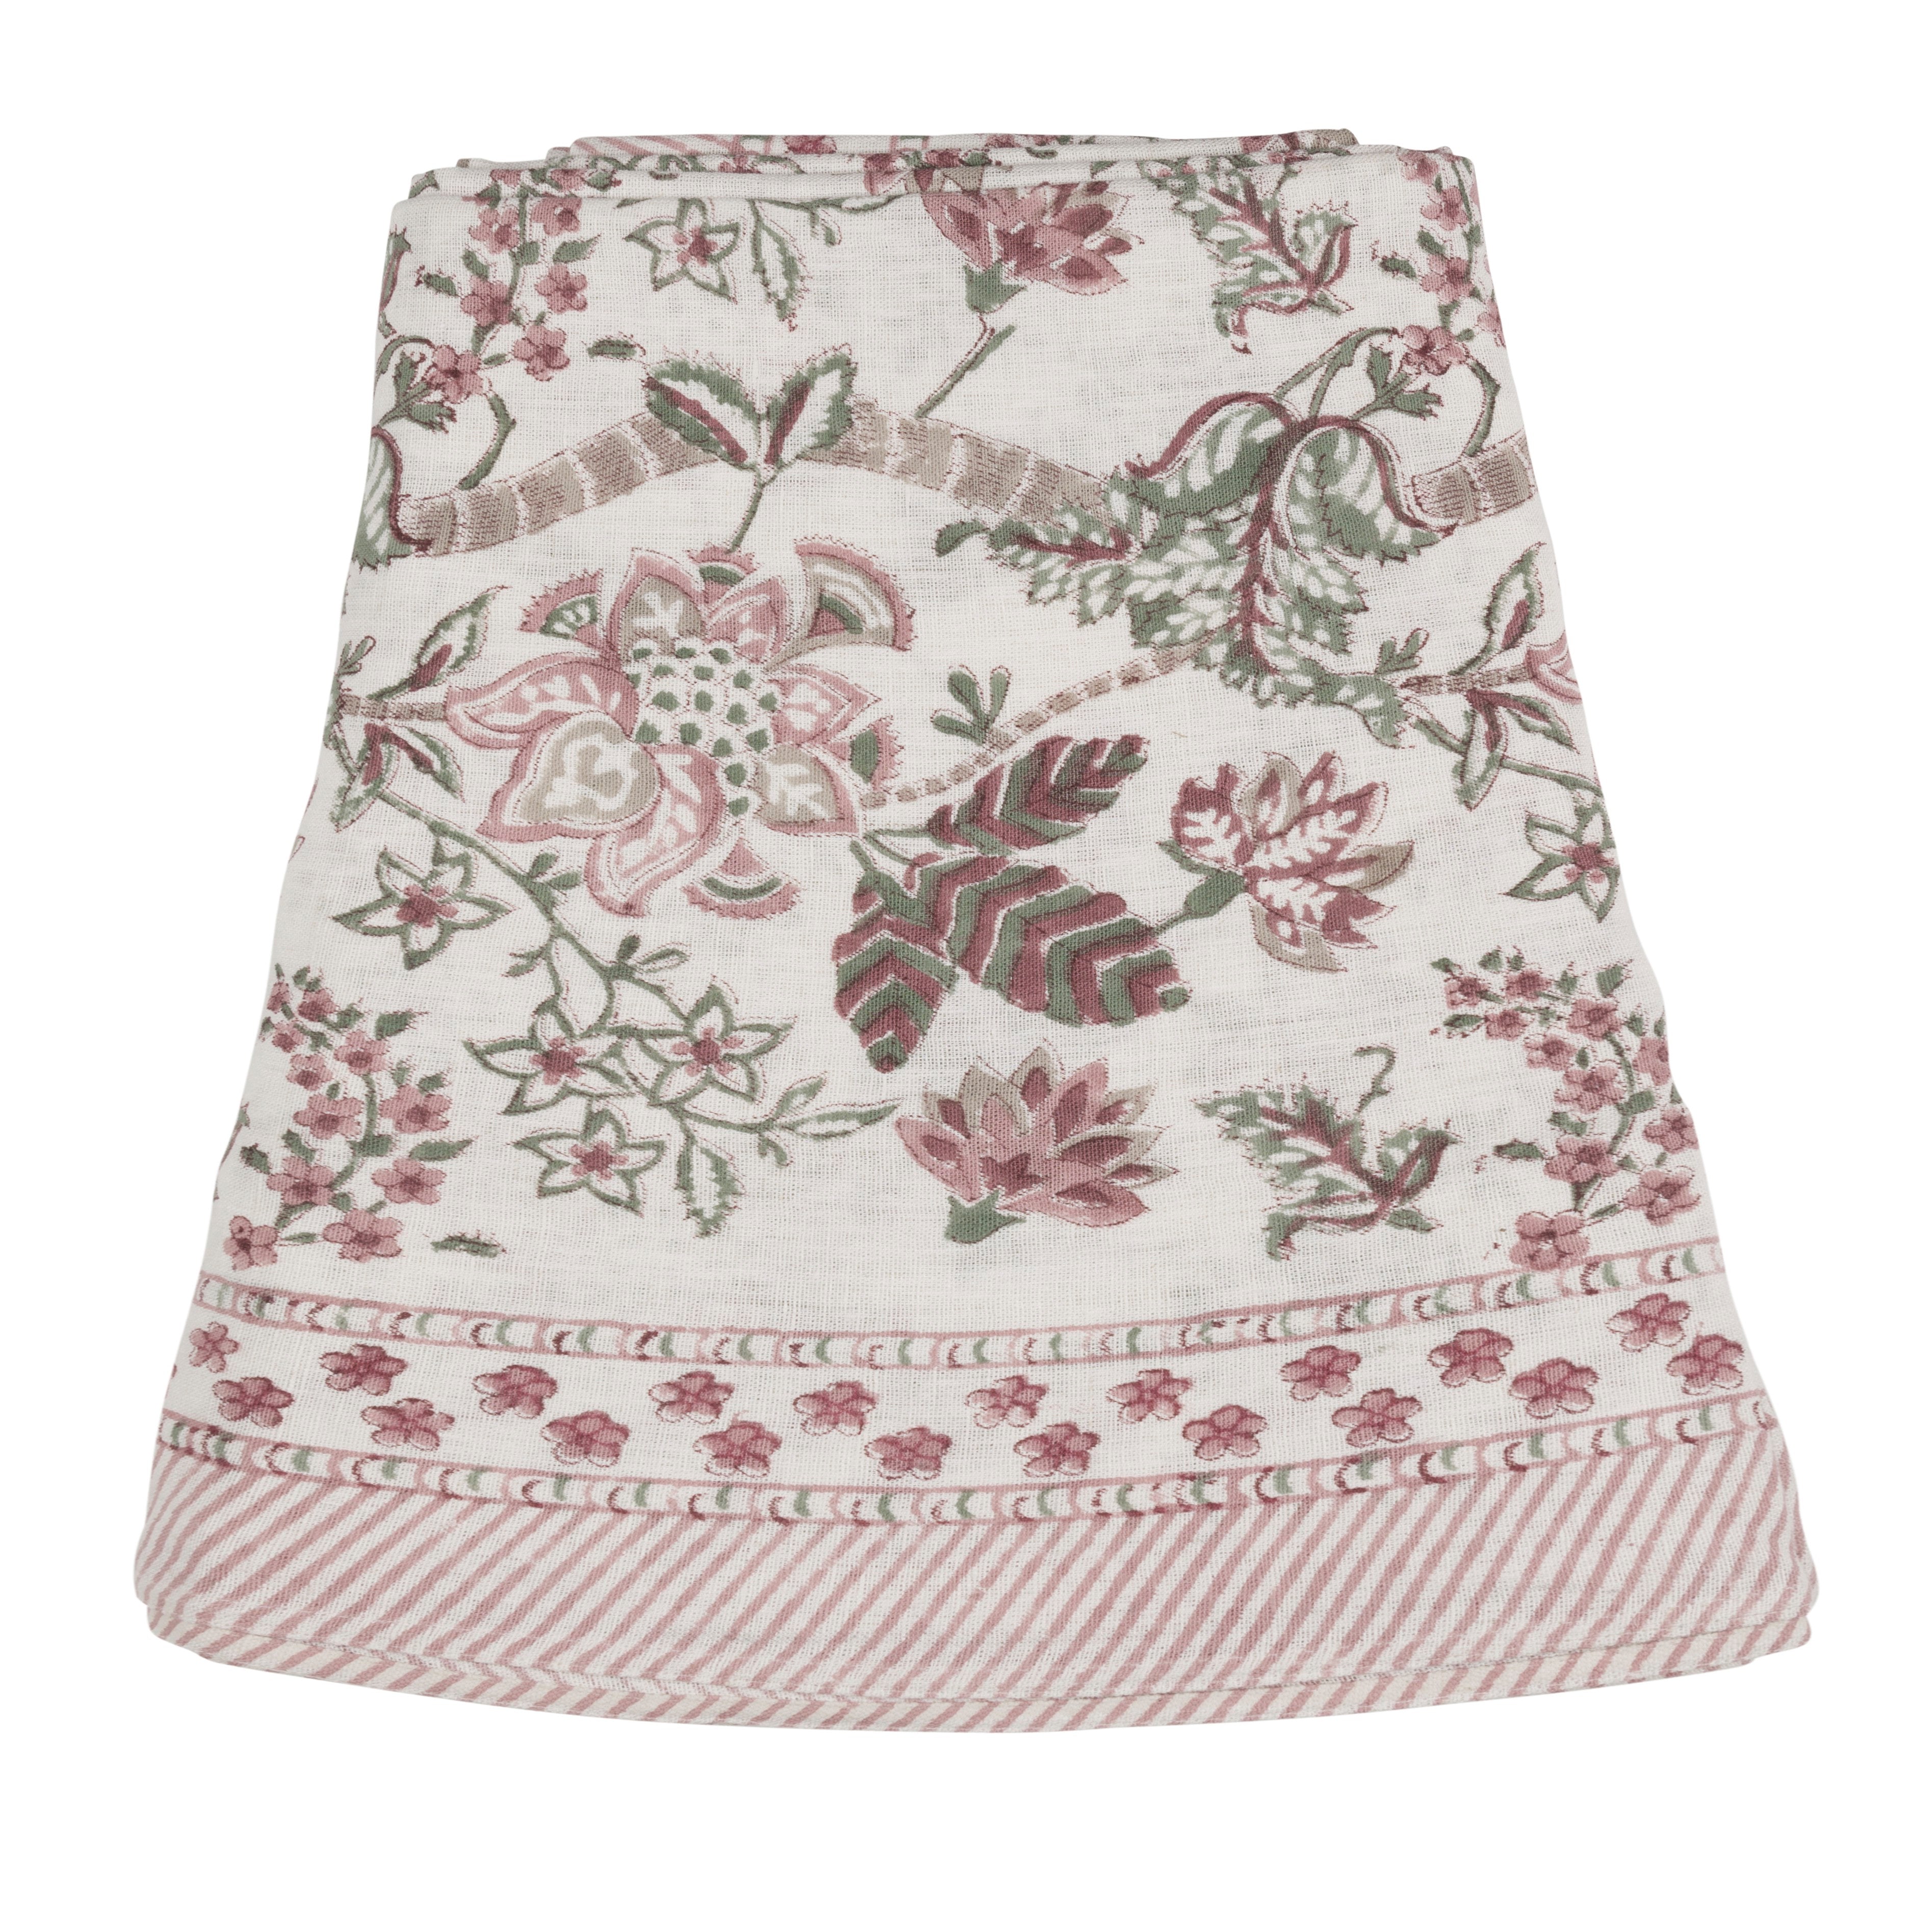 Round linen tablecloth with Floral print in Ruby